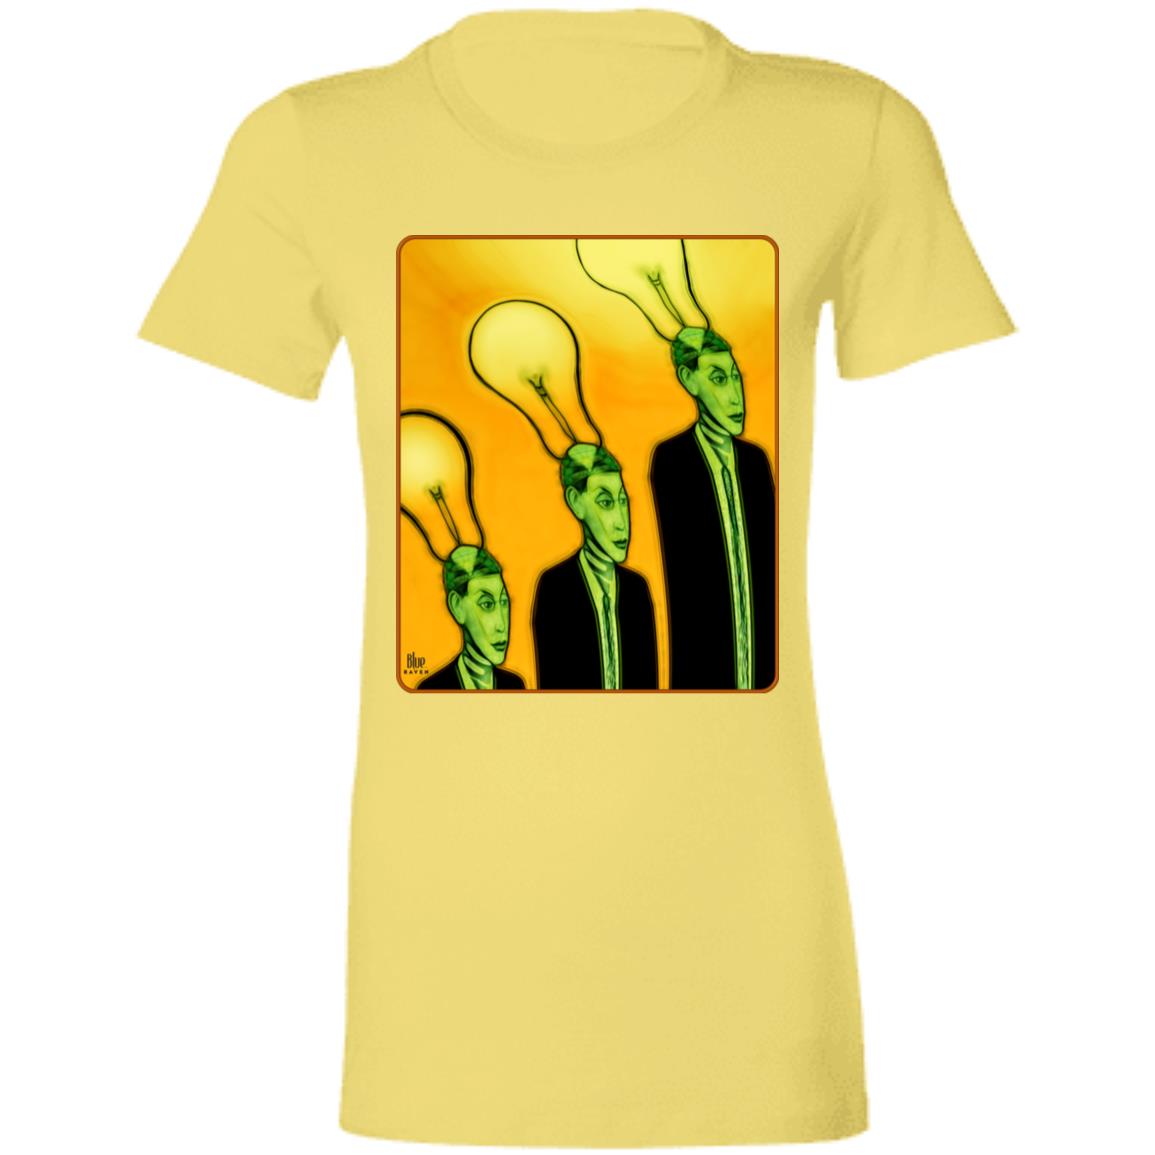 Brighter Idea -Women's Fitted T-Shirt